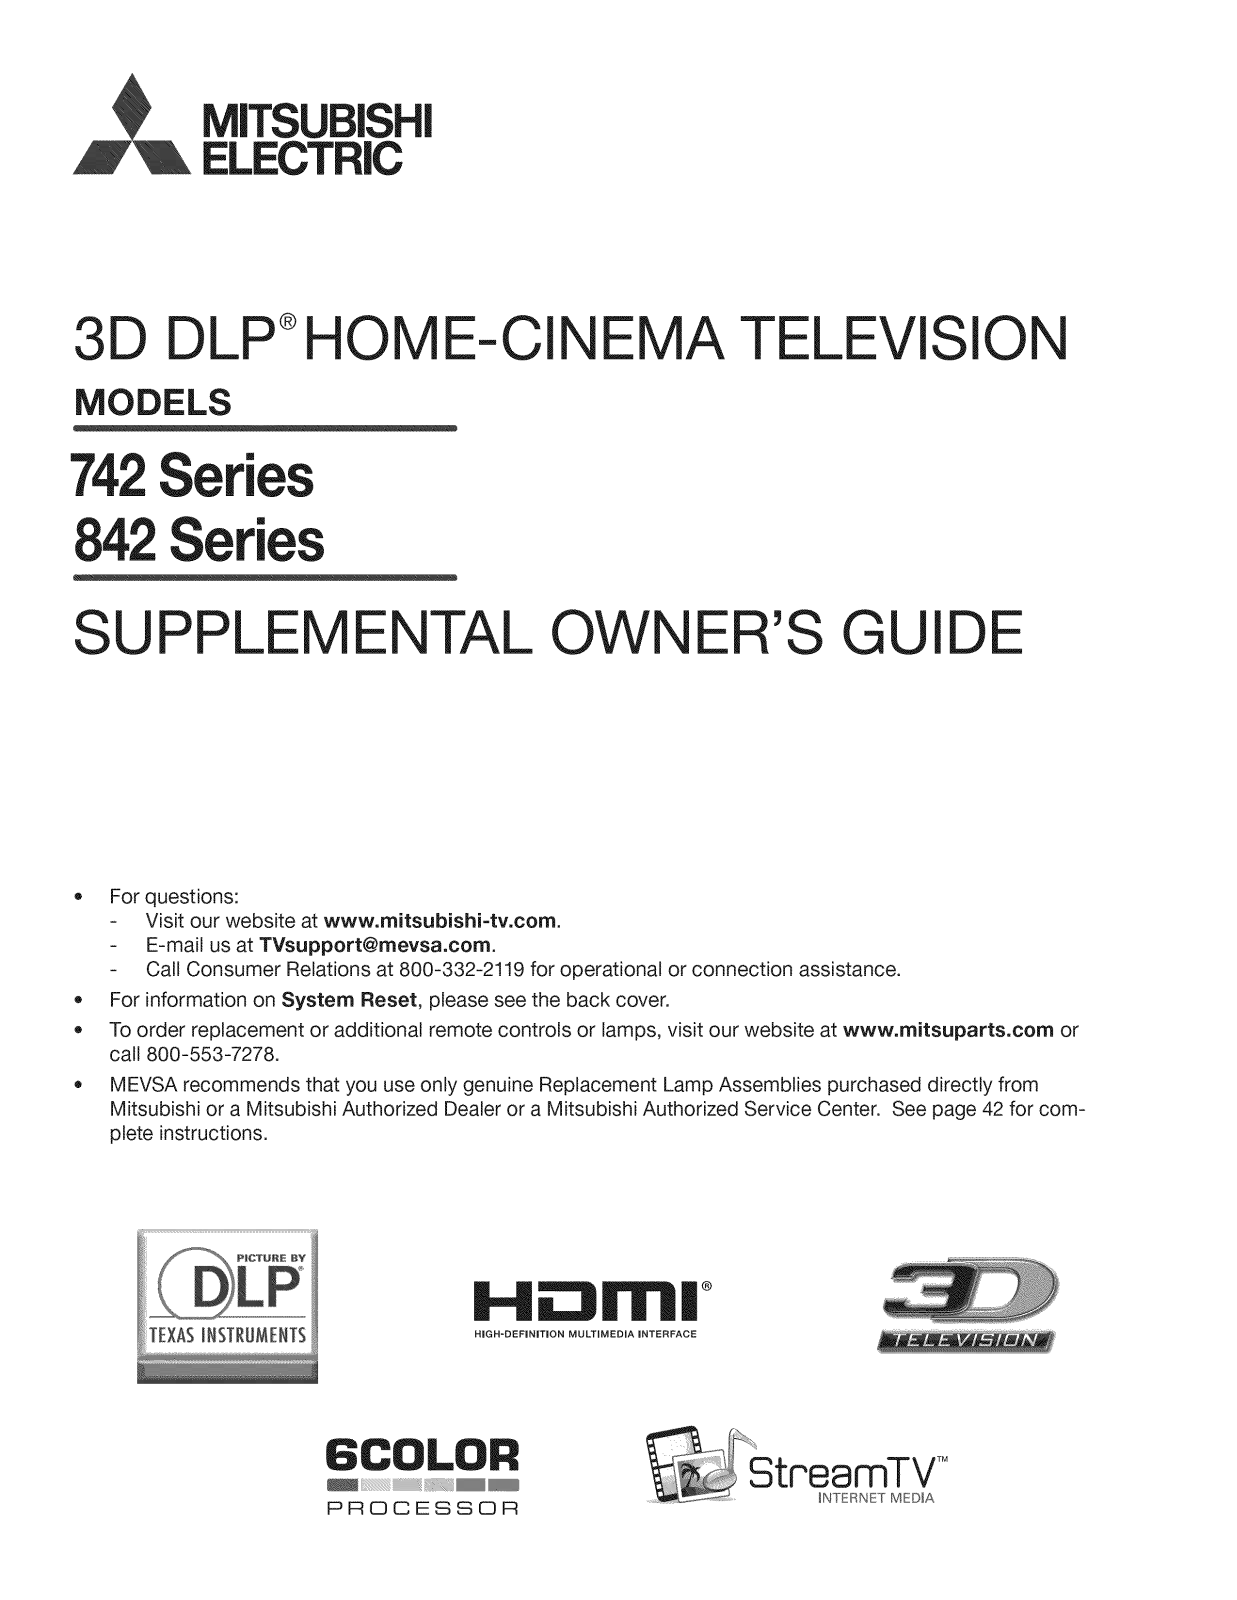 Mitsubishi WD-92842, WD-92742, WD-82842, WD-82742, WD-73842 Owner’s Manual